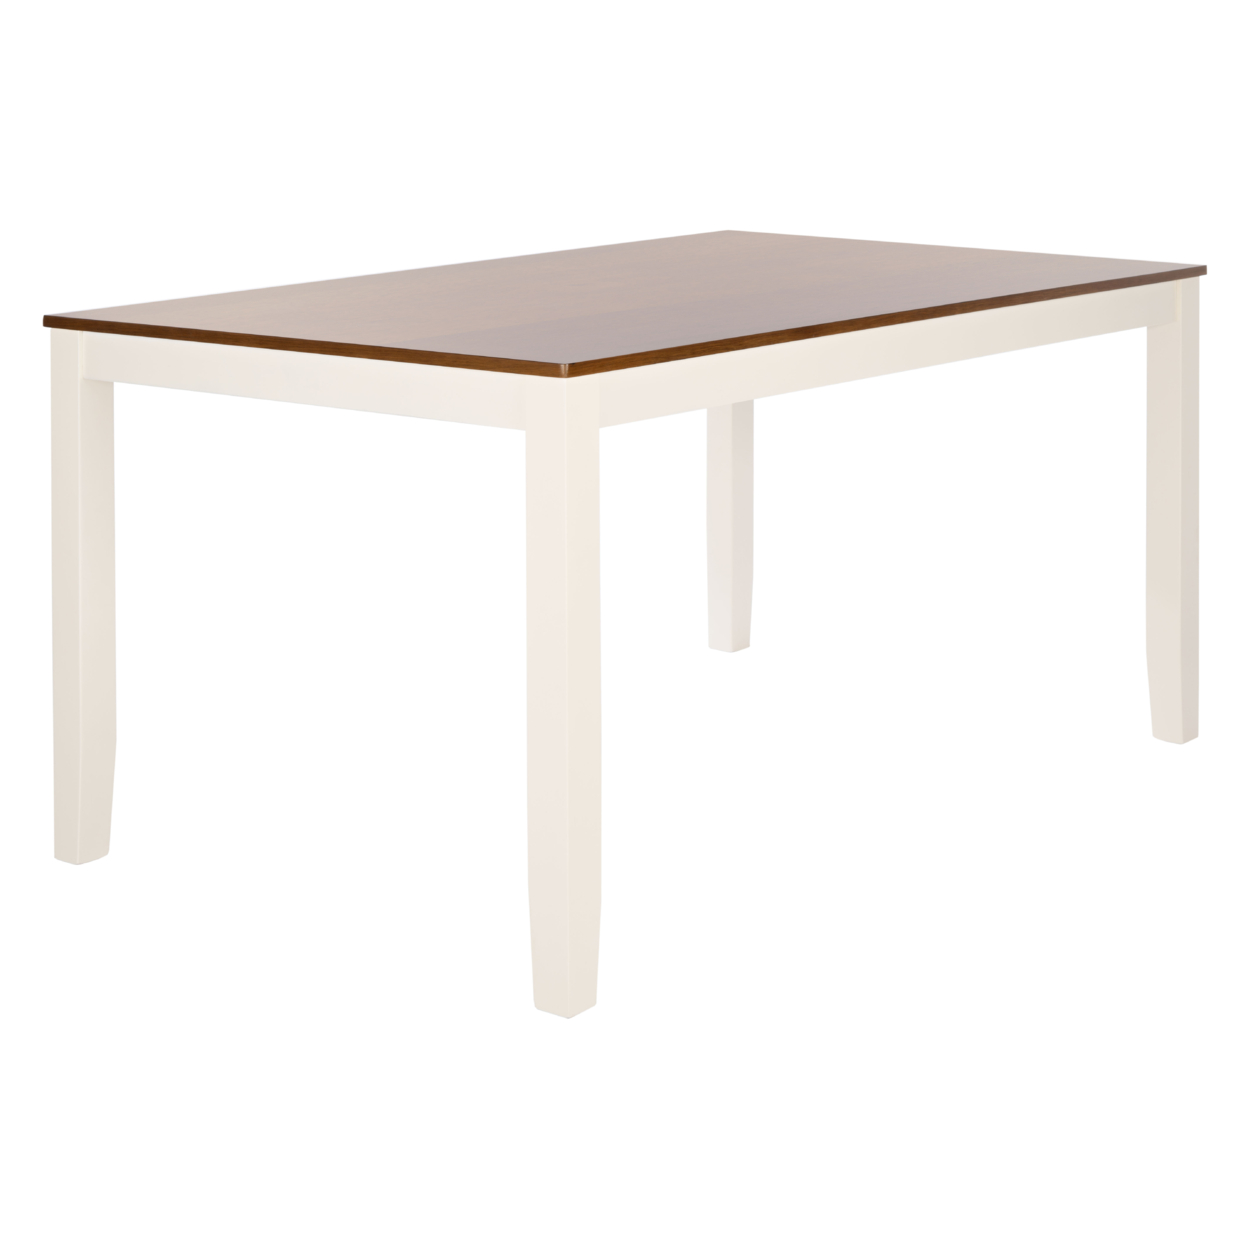 SAFAVIEH Silio Rectangle Dining Table White / Natural